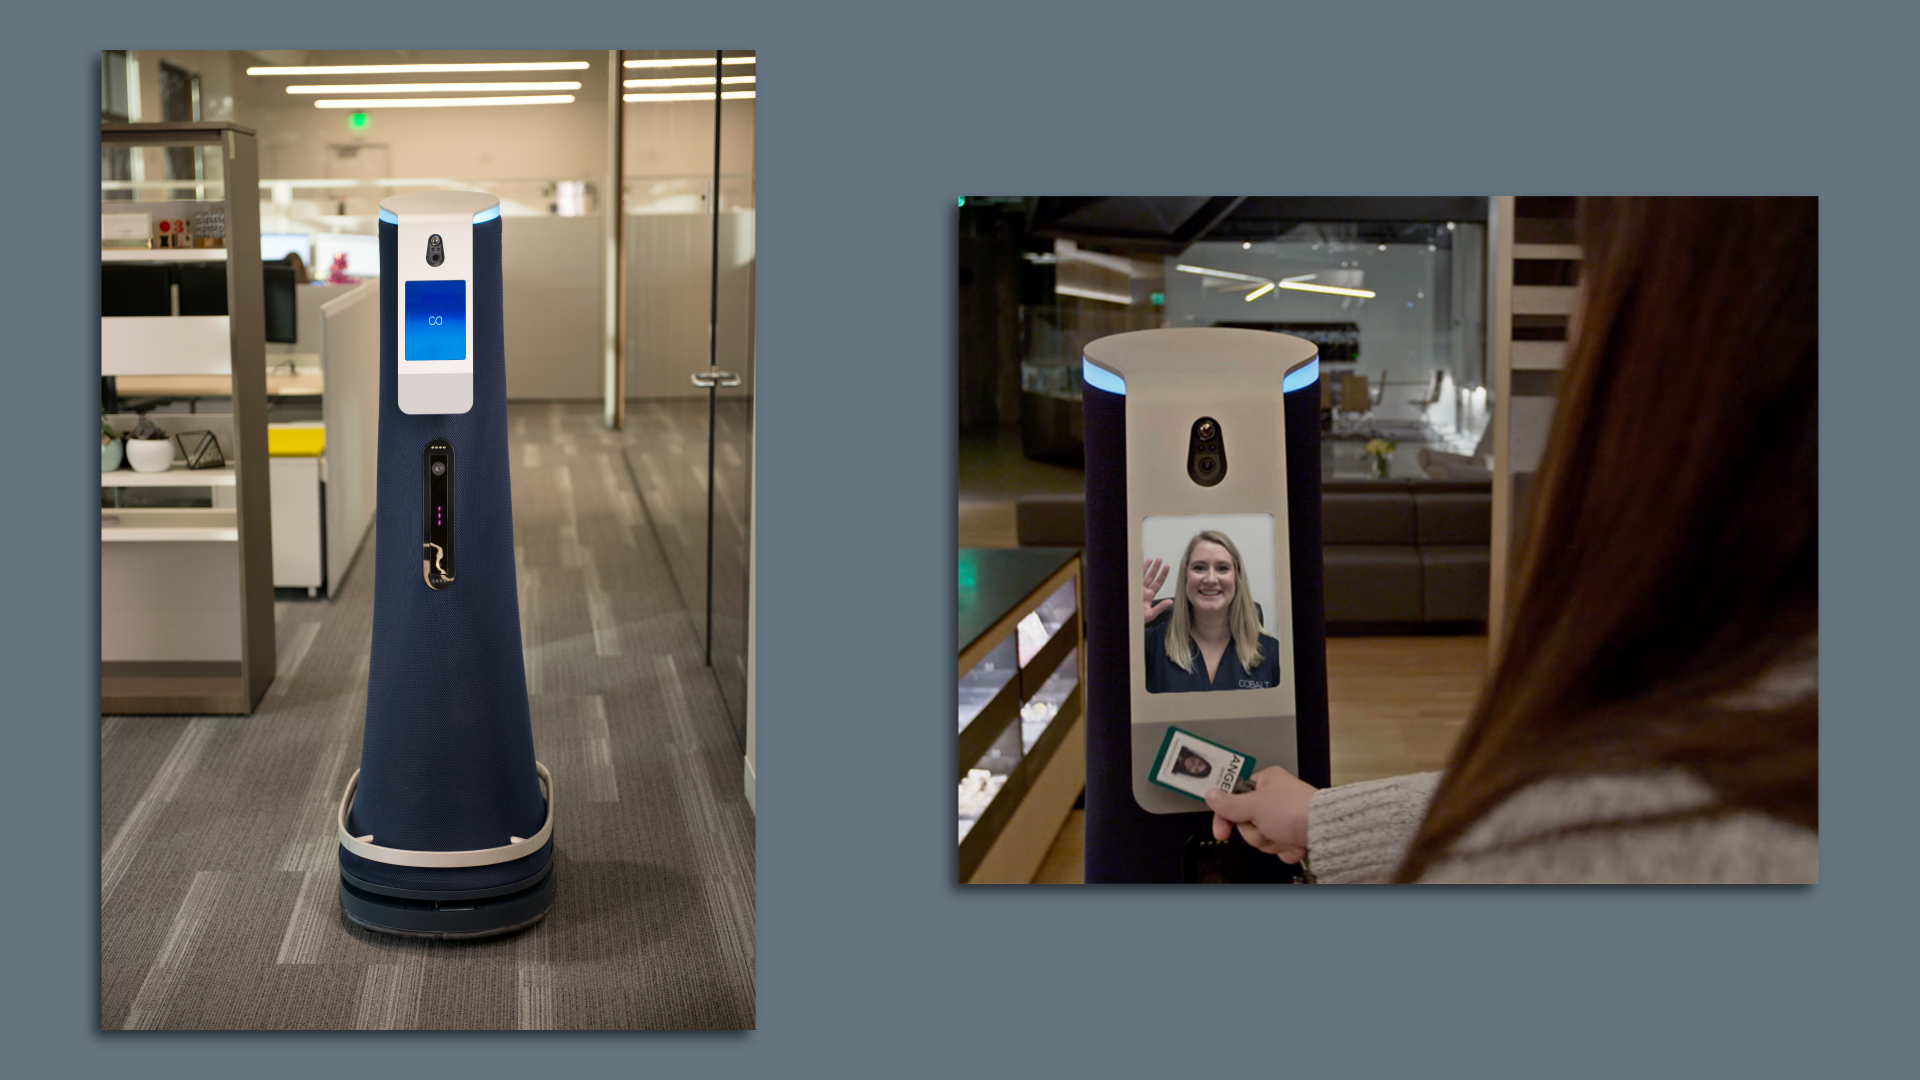 Two views of a Cobalt Robotics robot in the office, showing how it roams hallways and has an interactive tablet that allows people to communicate with a call center.